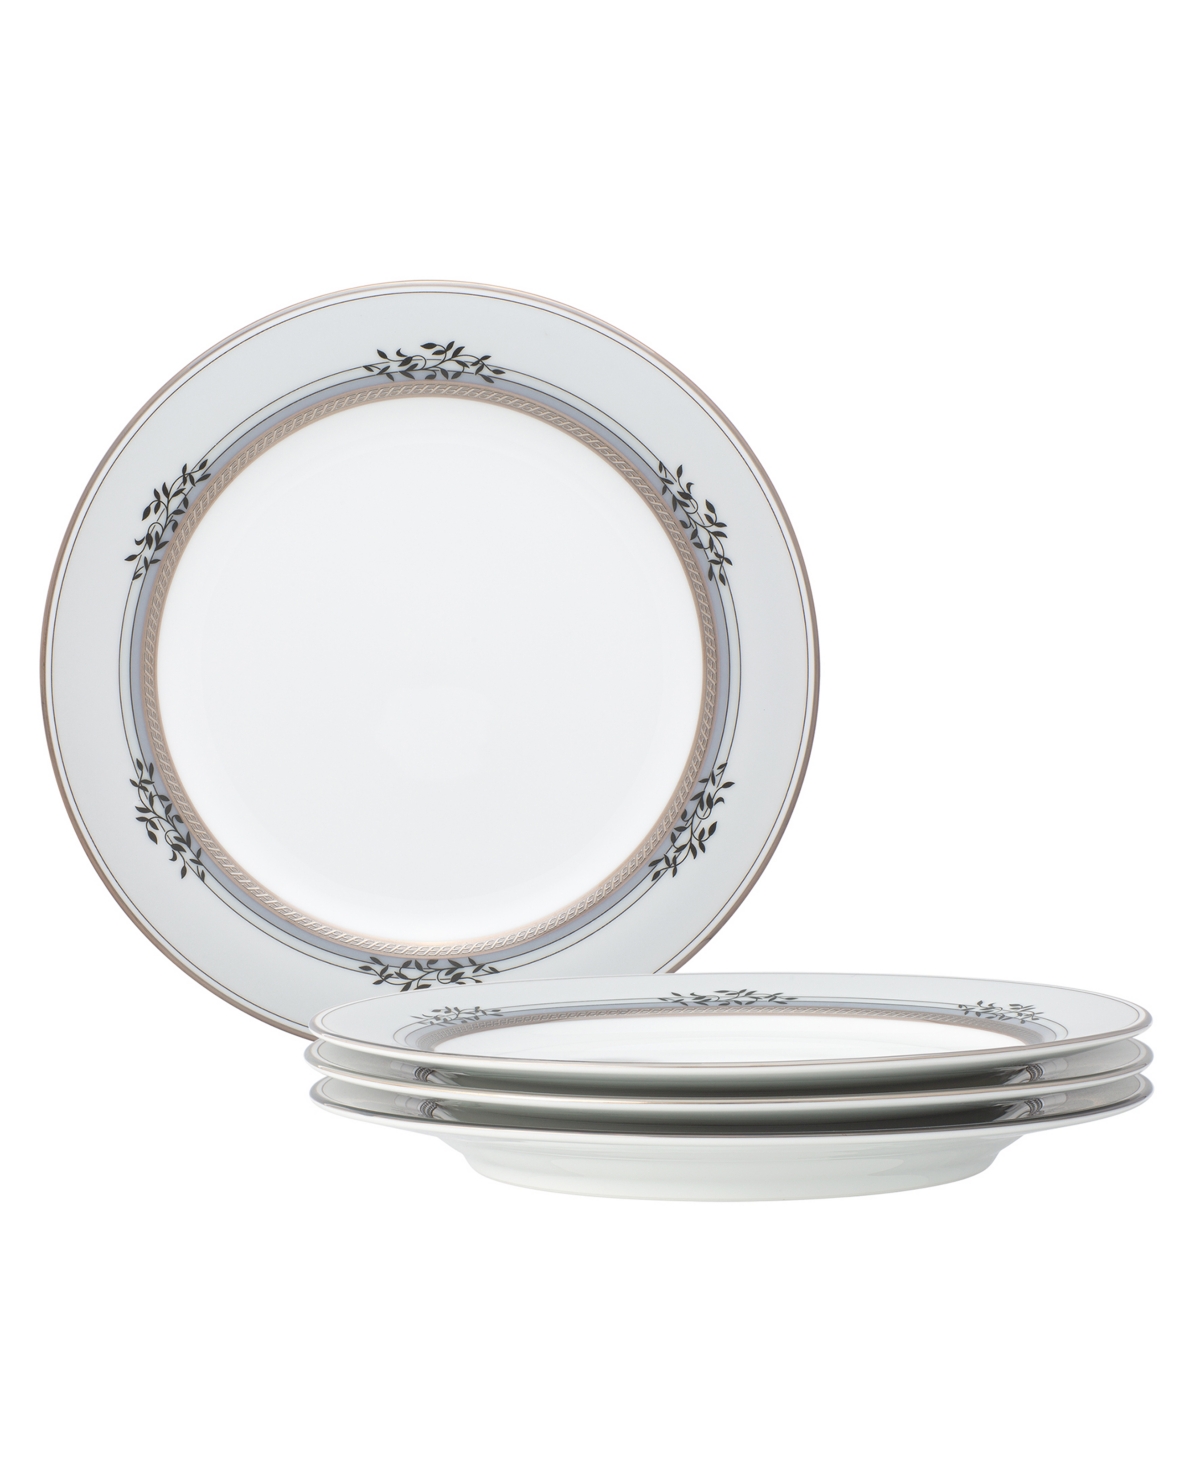 Noritake Laurelvale 4 Piece Salad Plate Set, Service For 4 In White